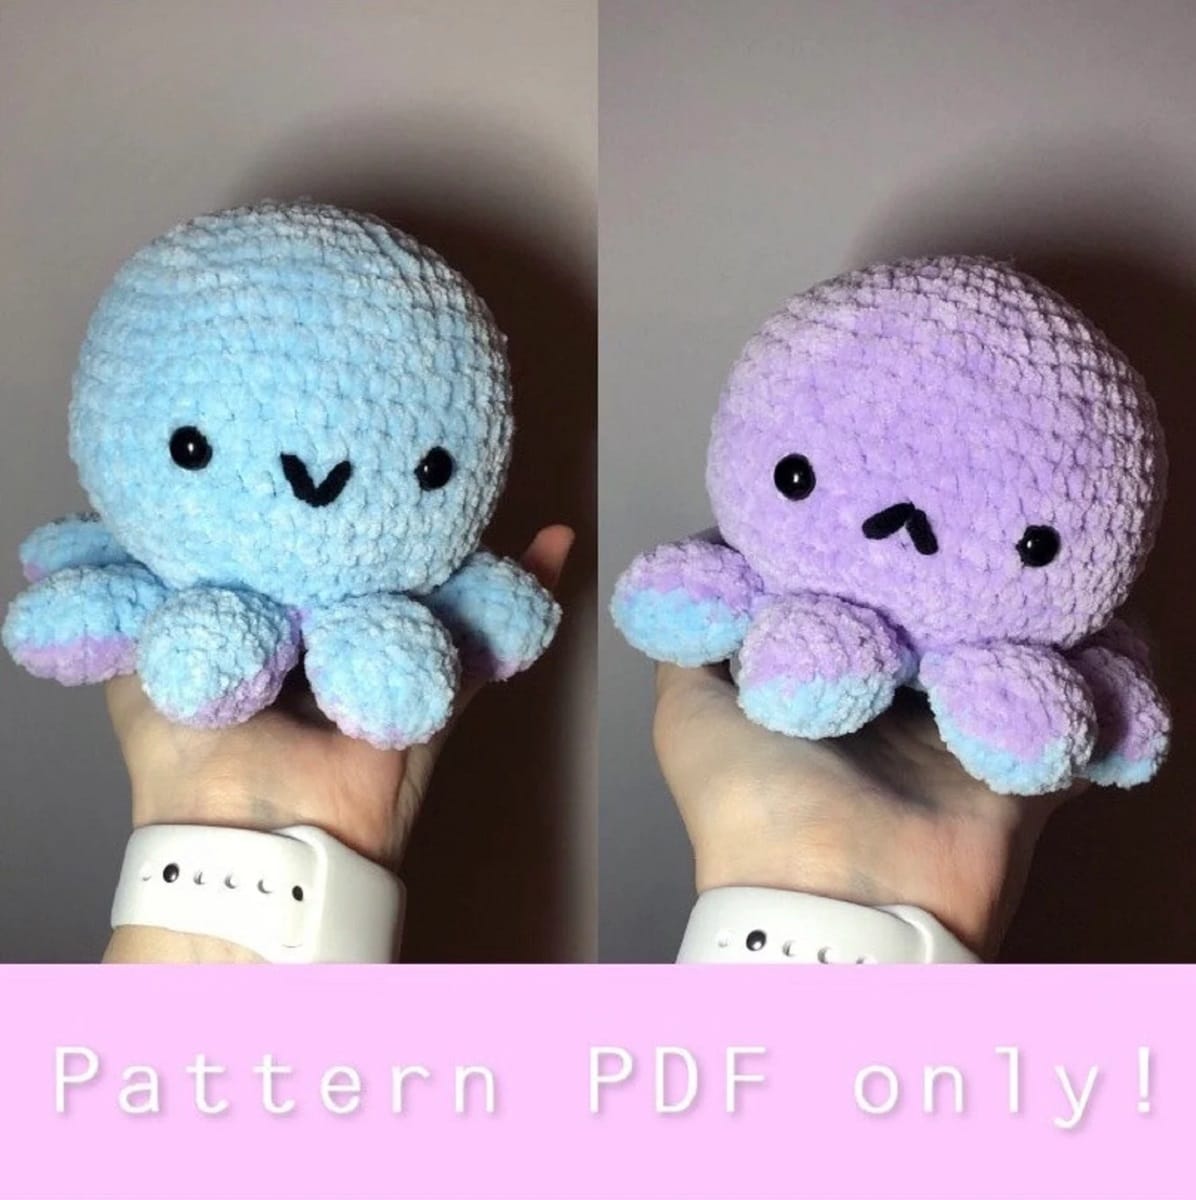 Reversible blue and purple crochet octopus with small, chubby tentacles. The blue octopus has a small smile and the purple a sad face.